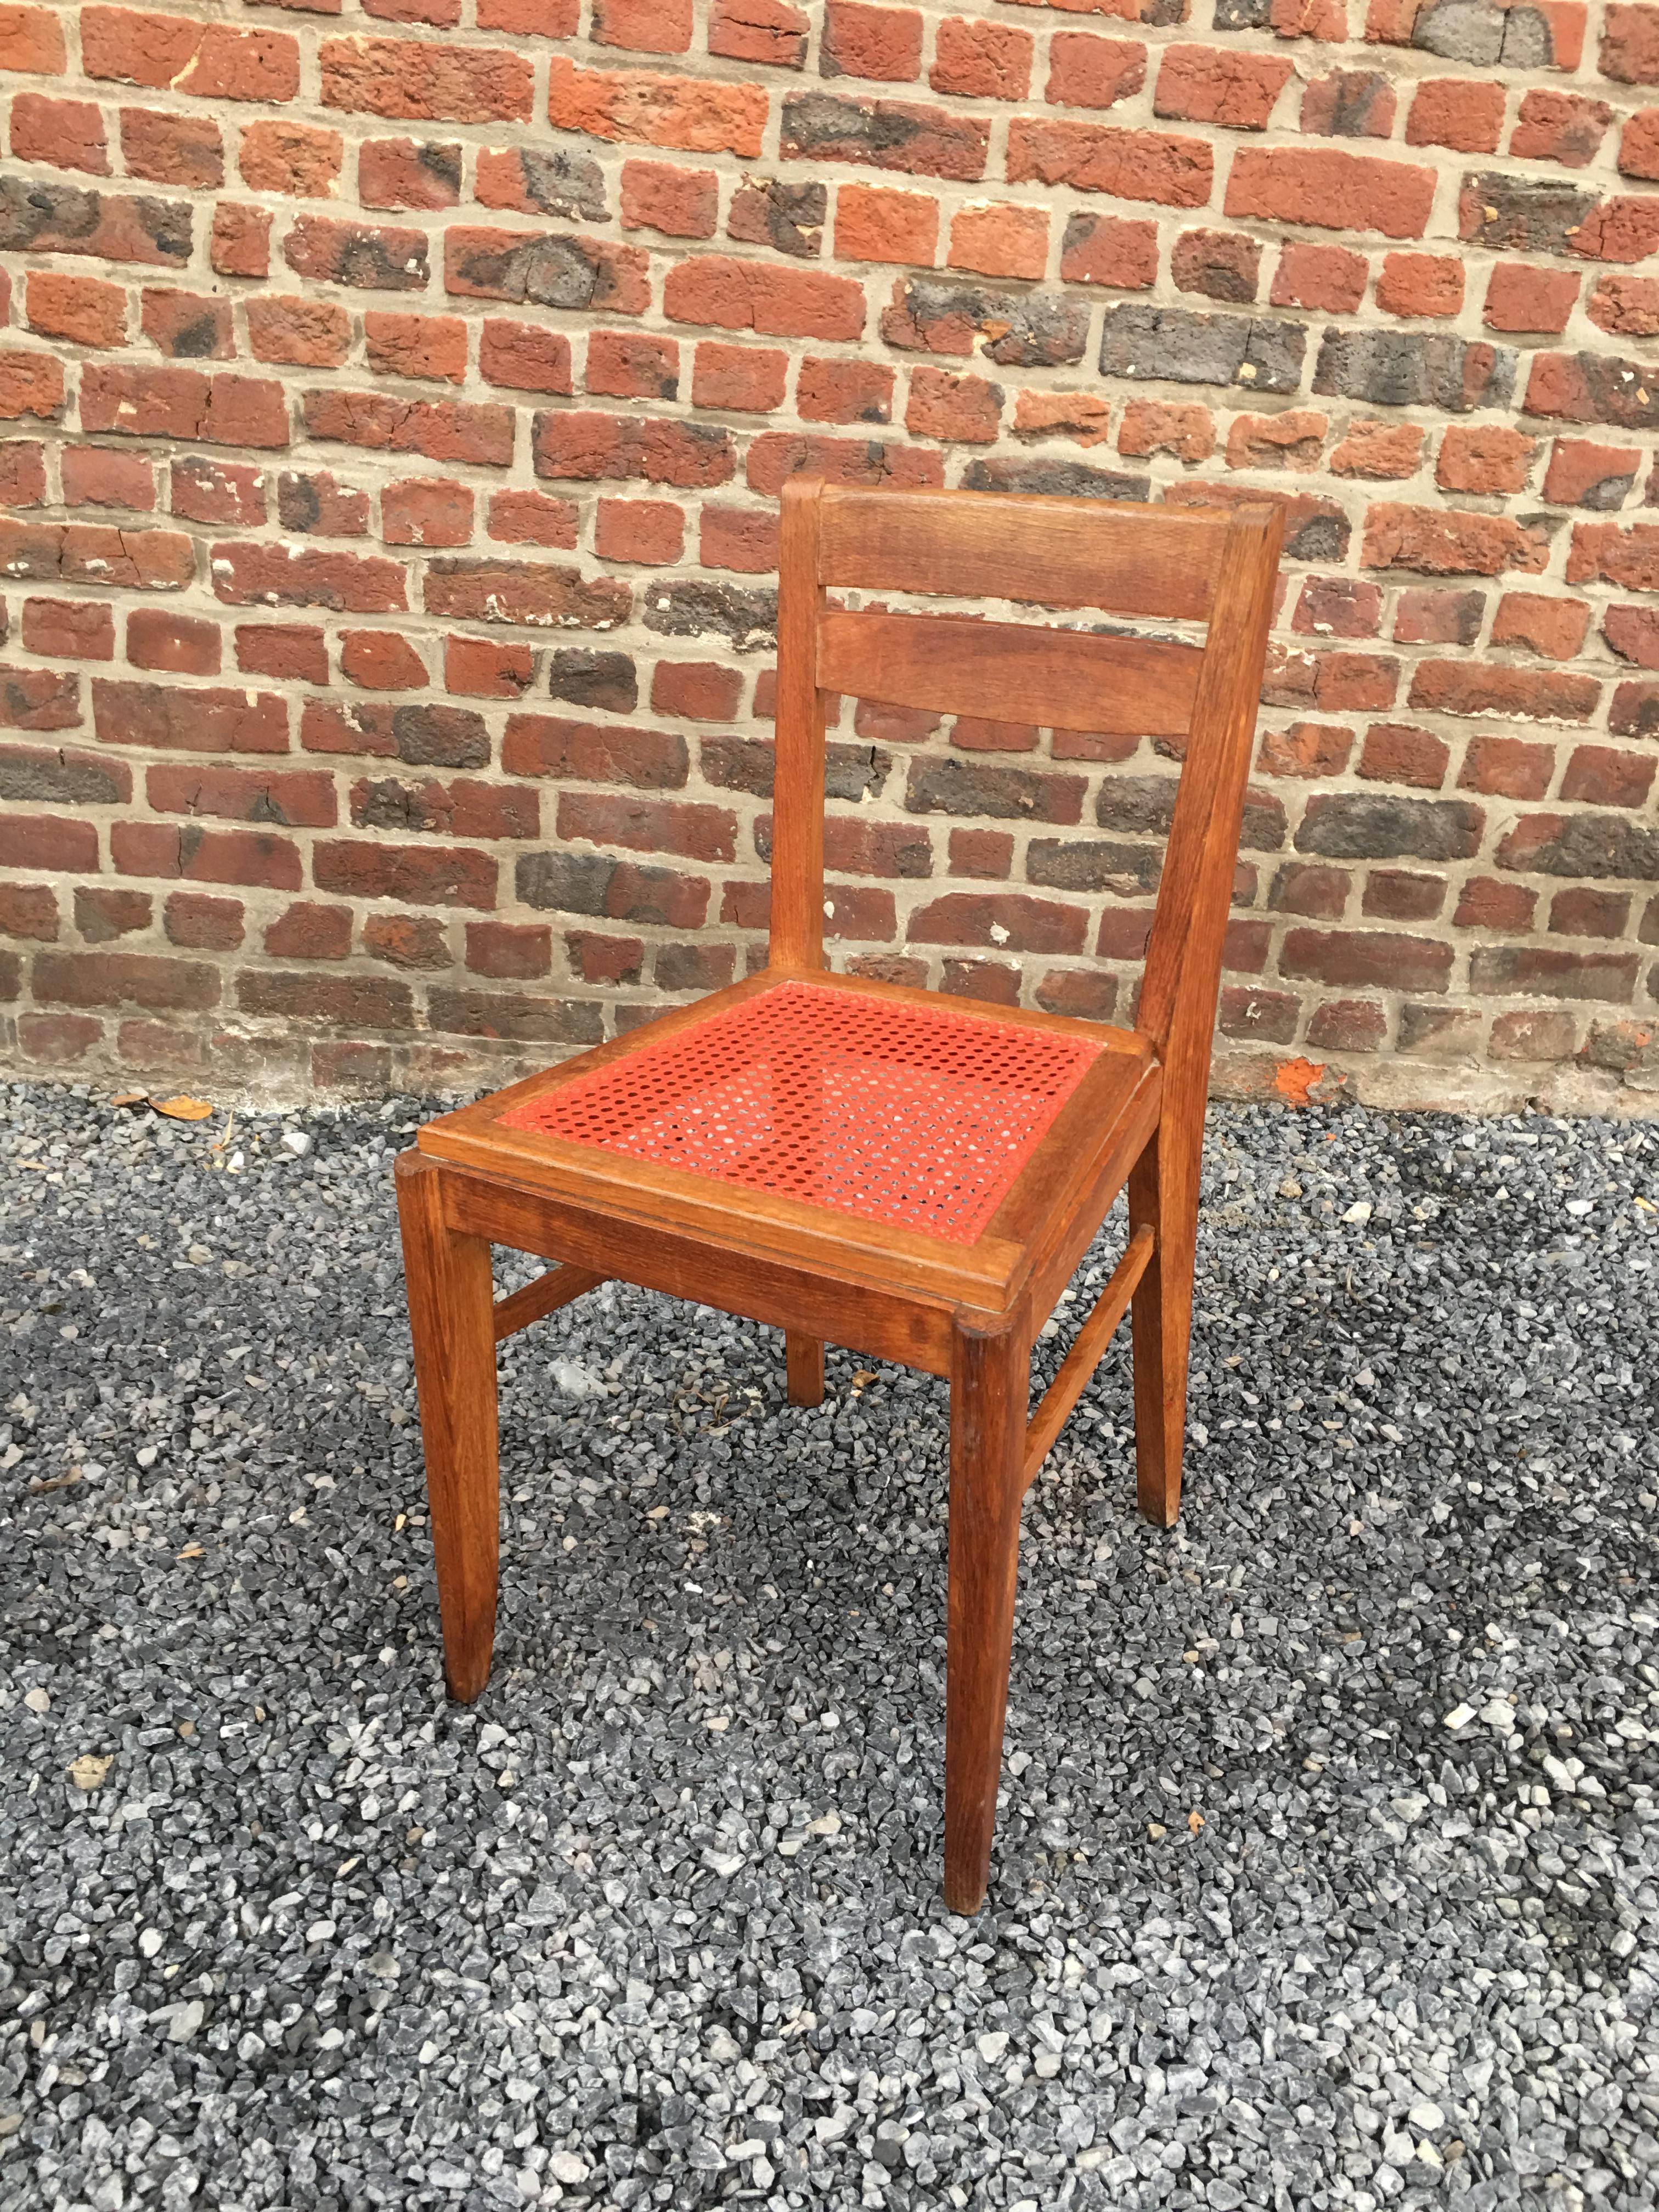 3 oak chairs in the style of René Gabriel, circa 1950.
Colorful caning of origin.